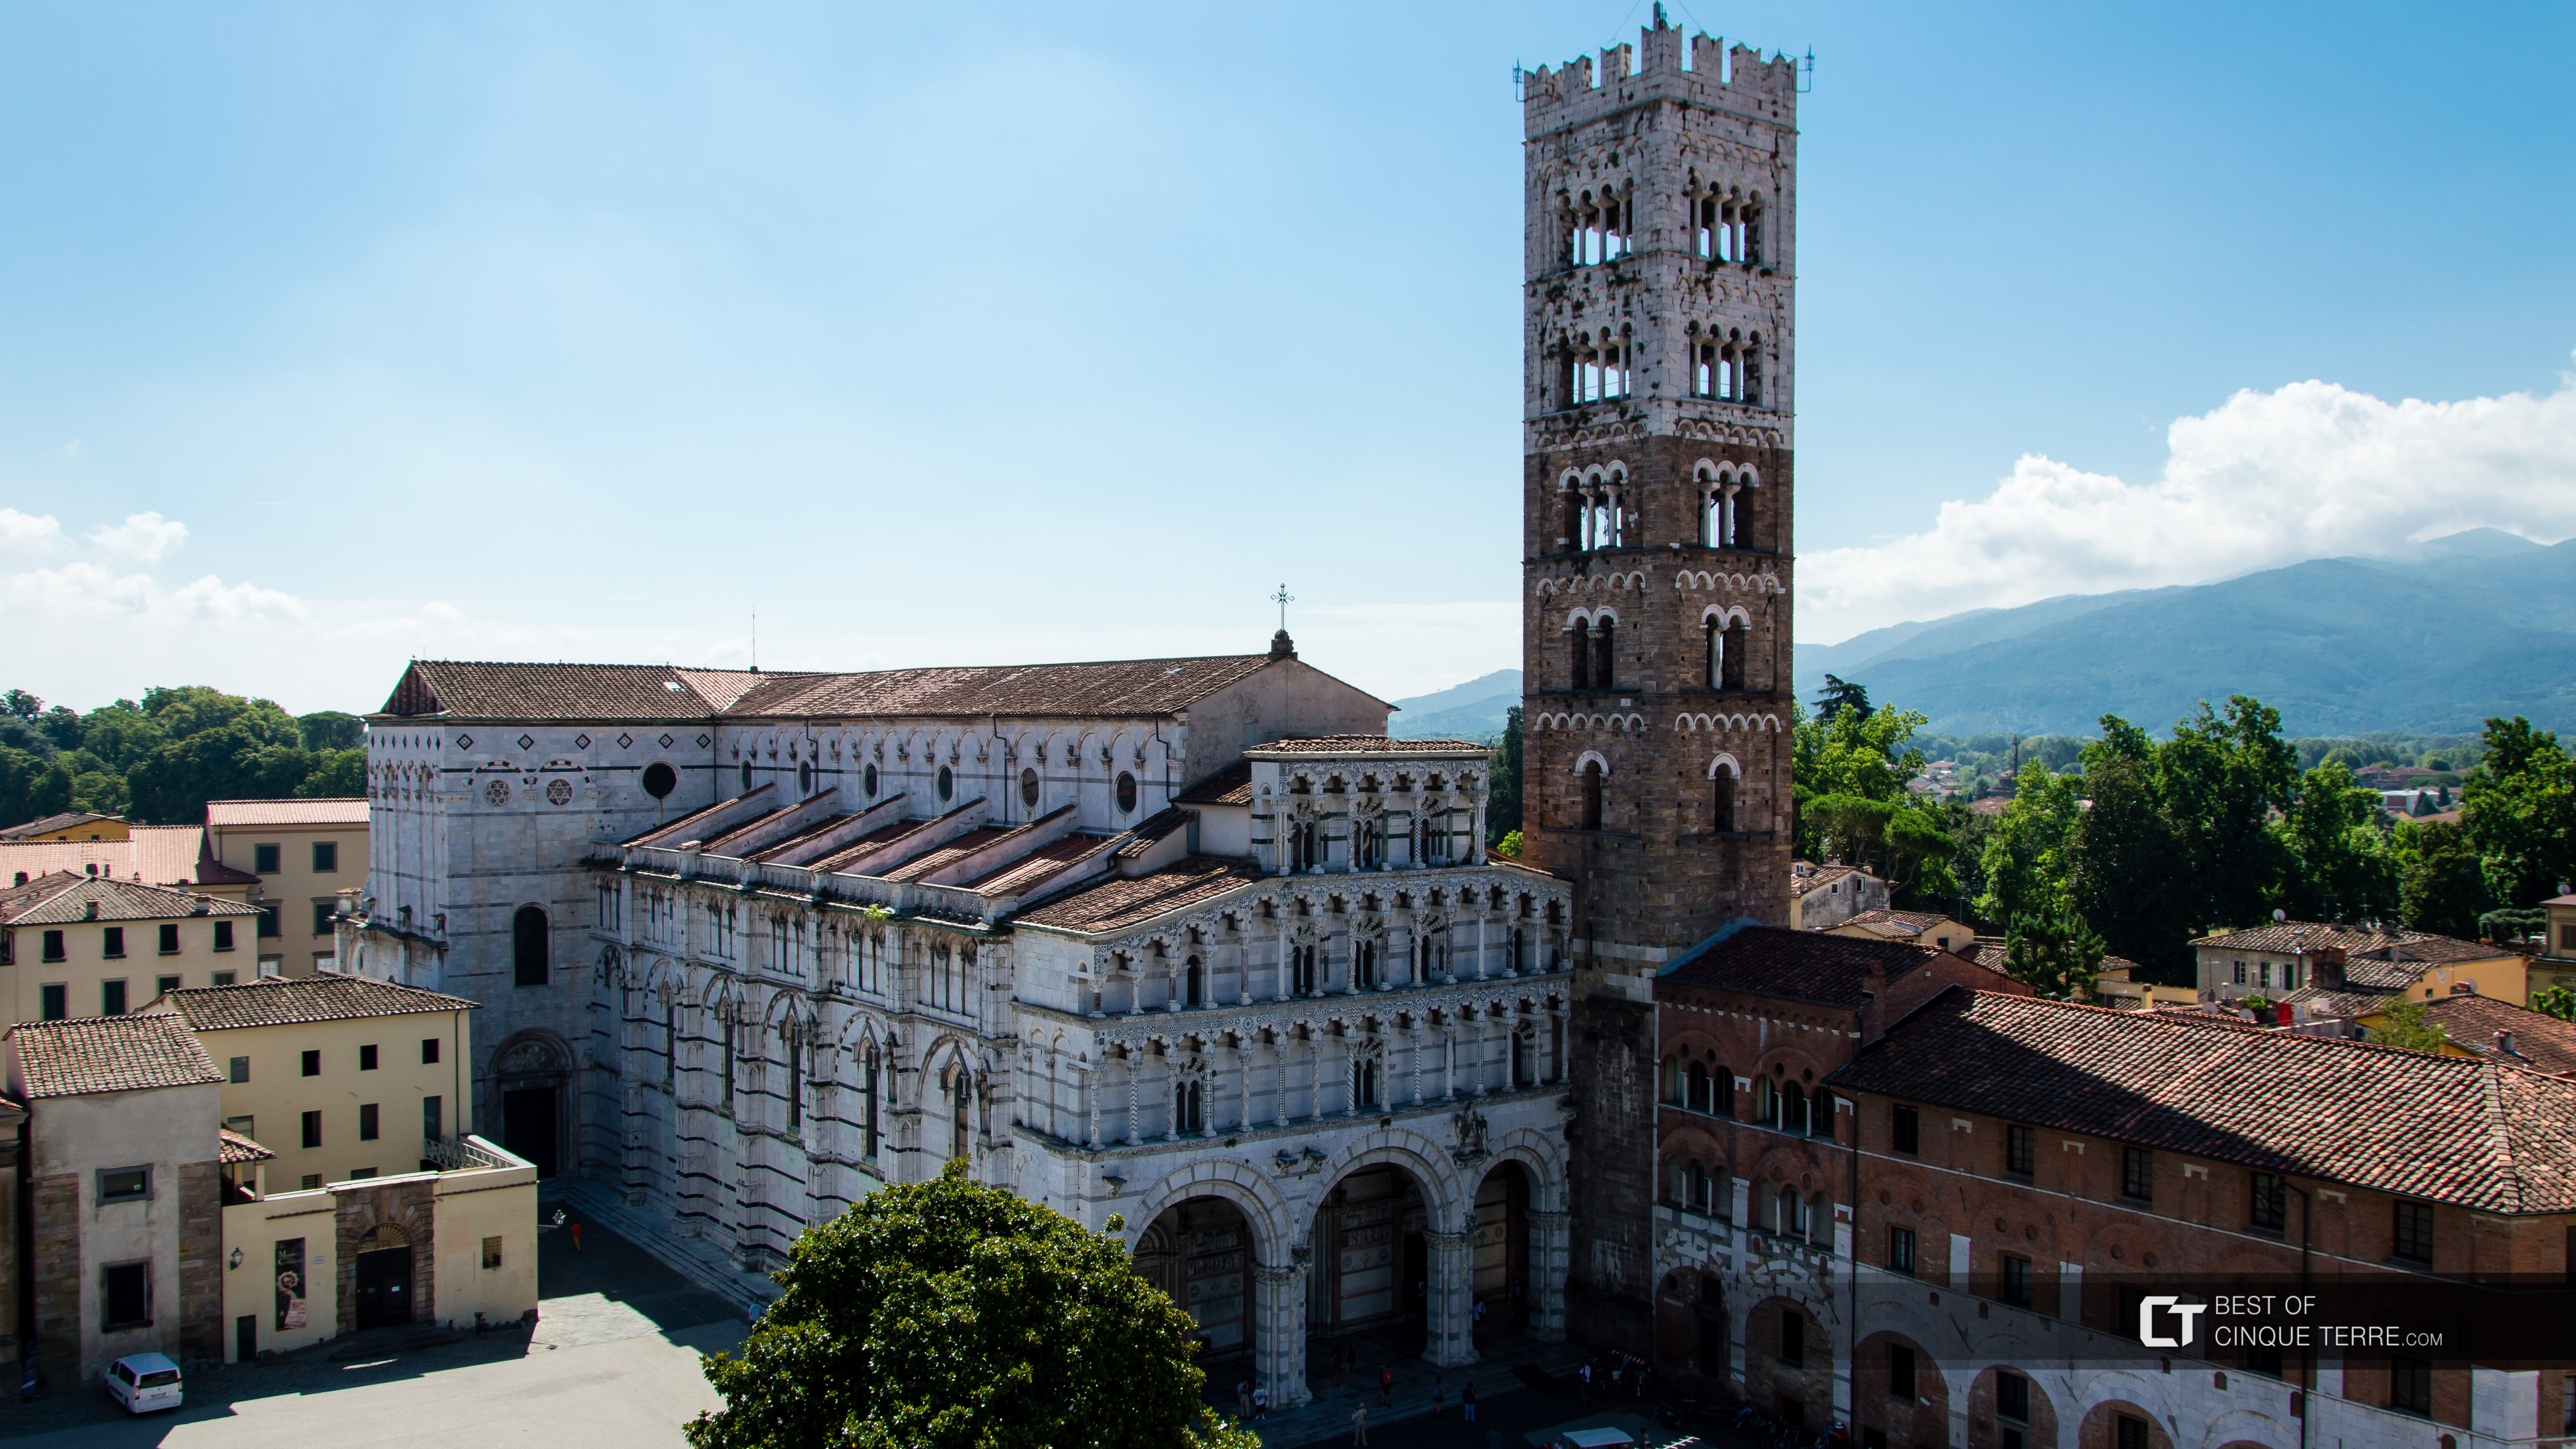 View from the Church bell tower to the Cathedral of Lucca, Italy